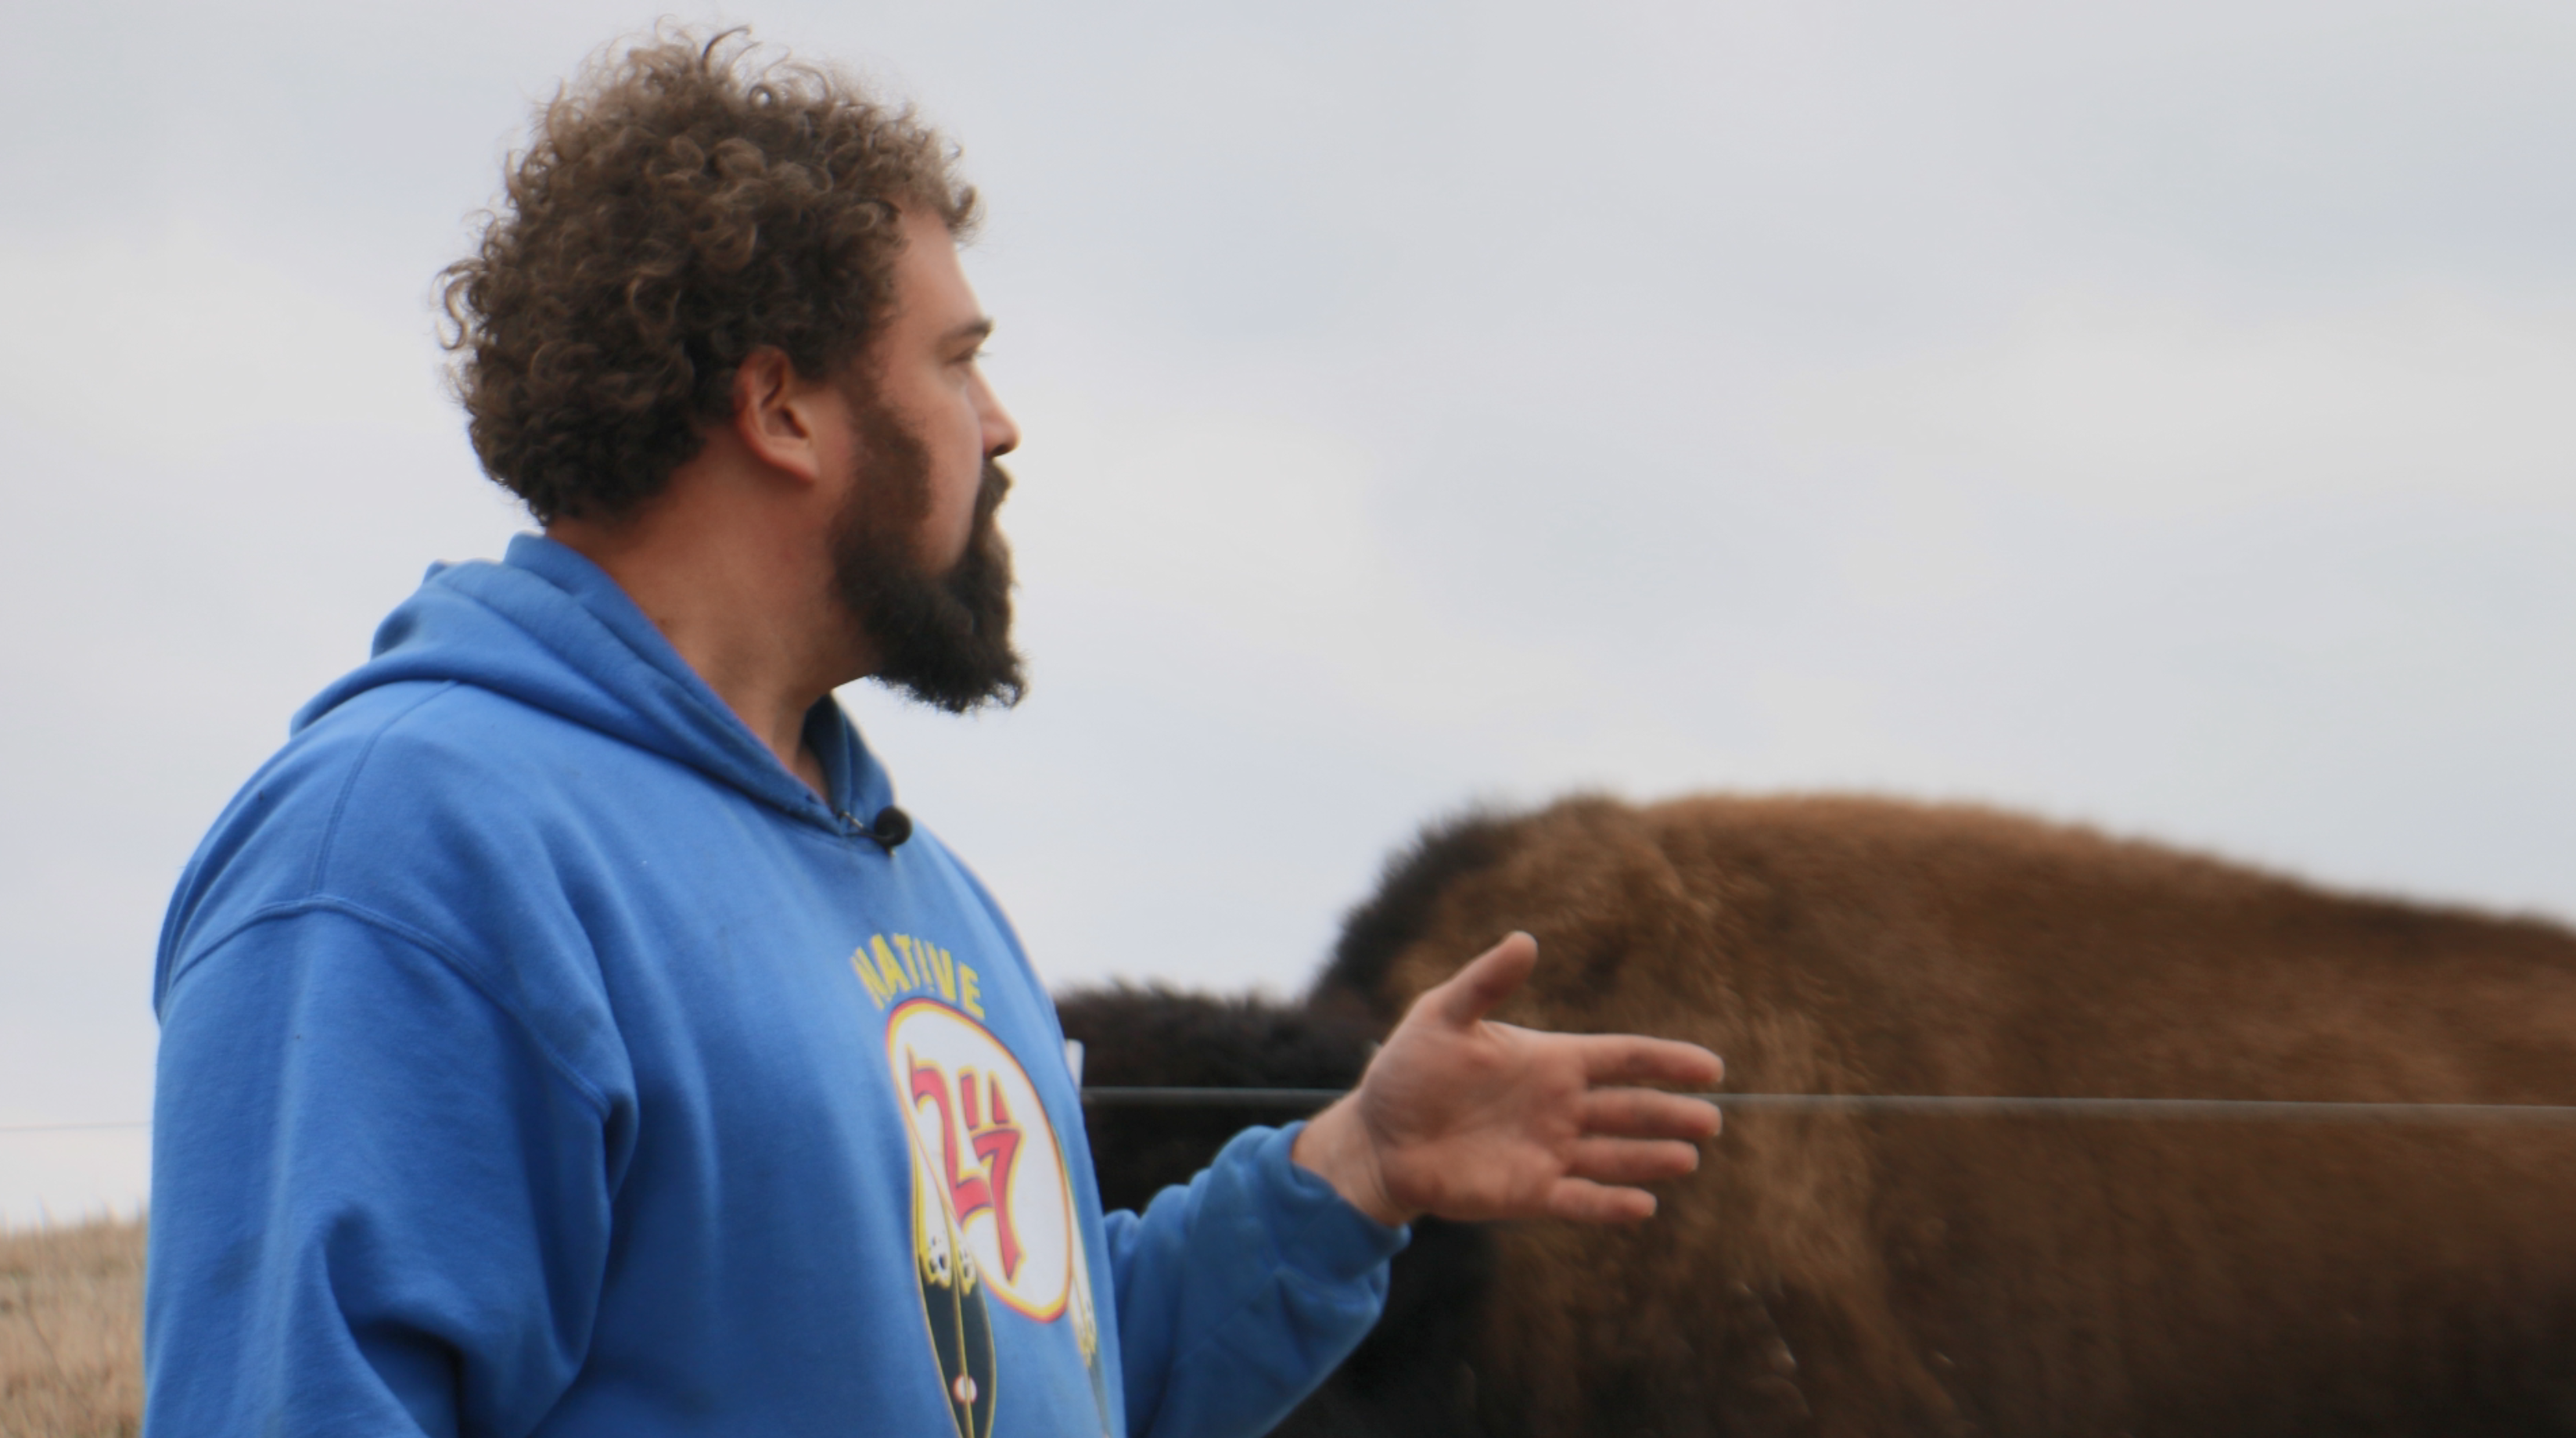 A man with curly hair and a beard, wearing a blue hooded sweatshirt, stands next to a real buffalo.